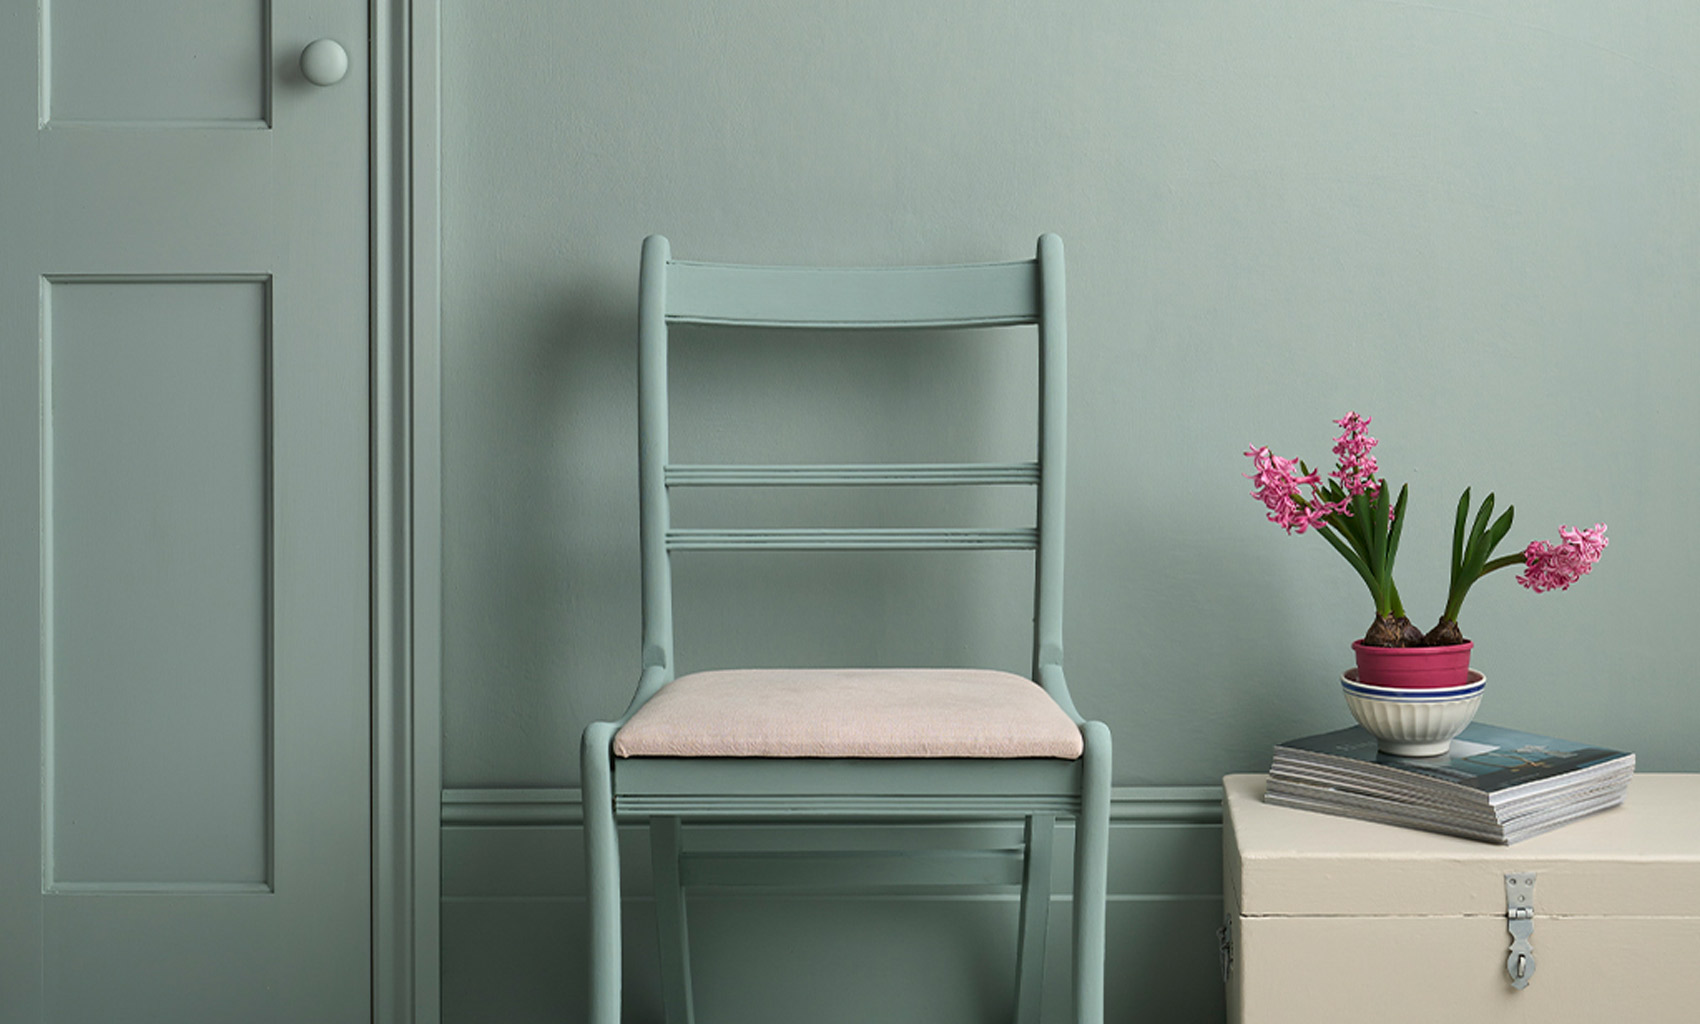 Annie Sloan Satin Paint in Pemberley Blue Lifestyle Image